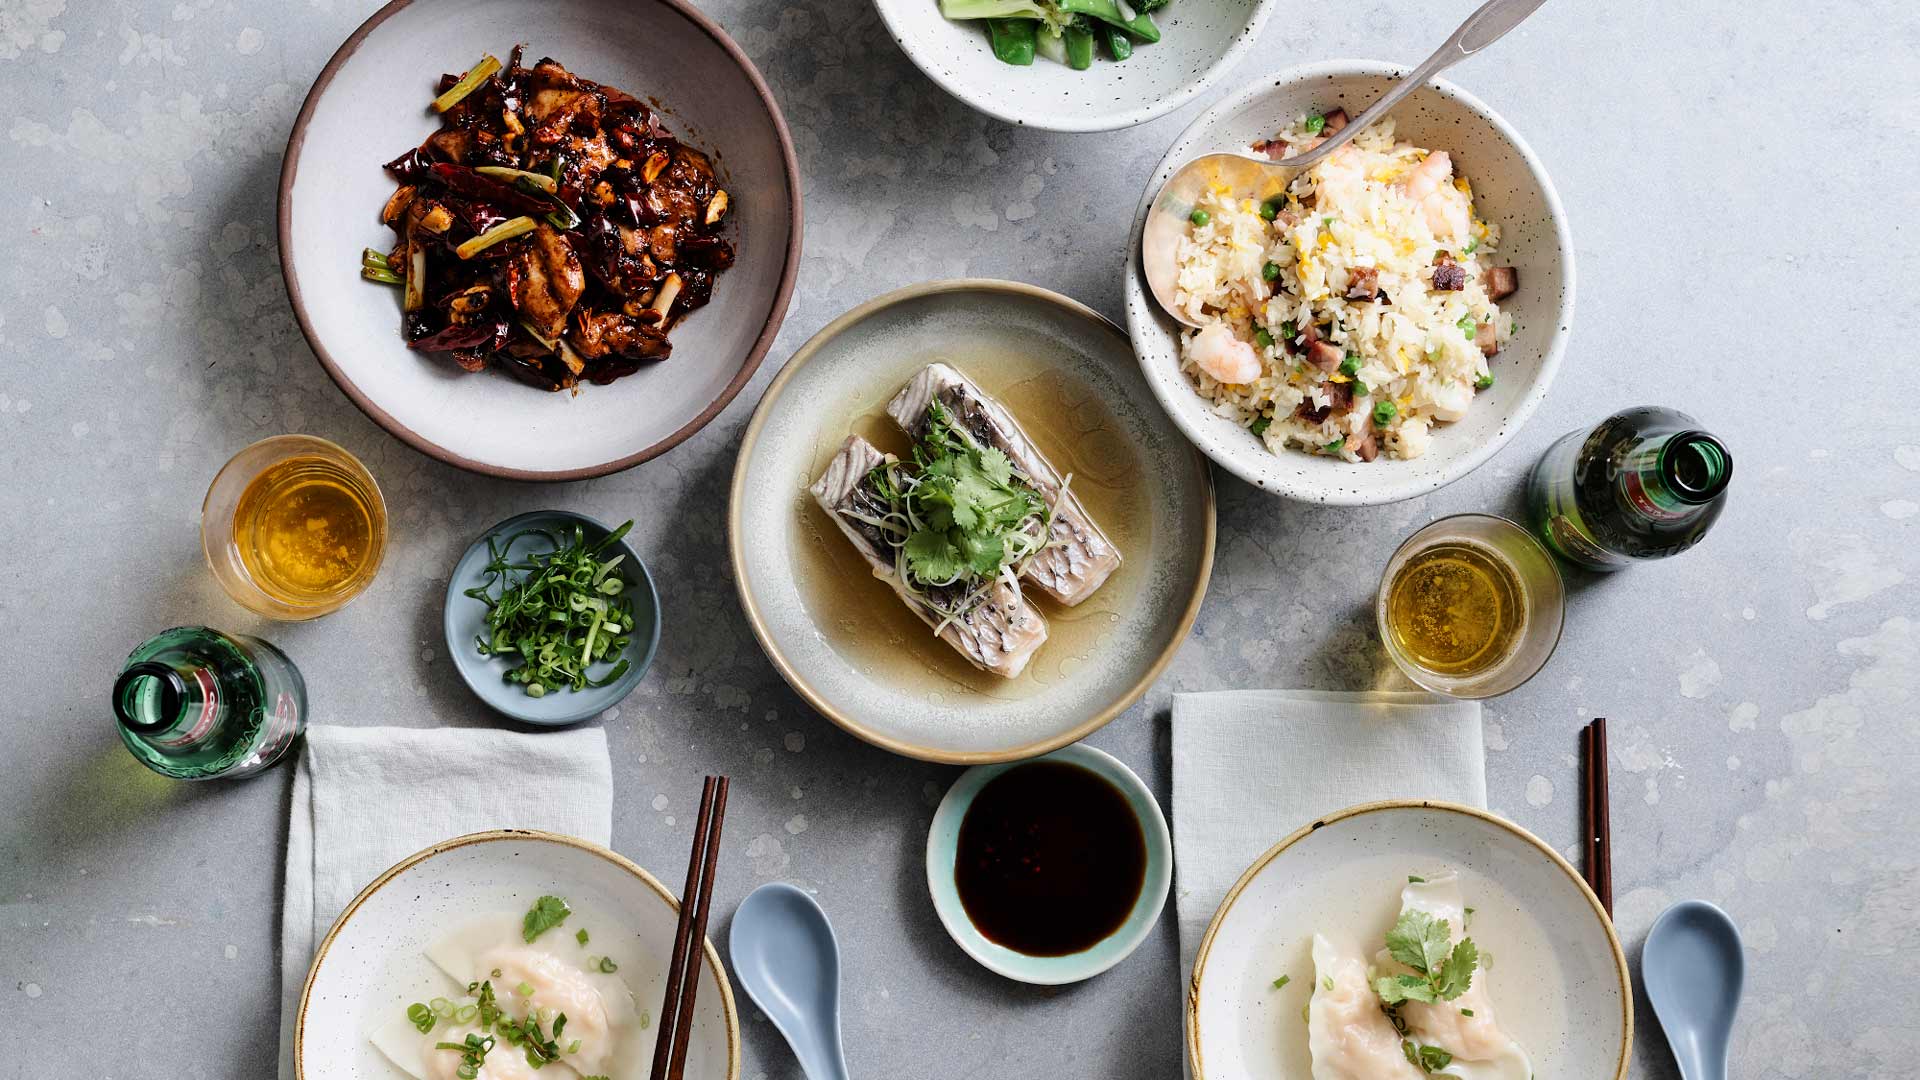 Merivale Is Bringing Its Ready-to-Eat Delivery Meal Service to Melbourne This Winter